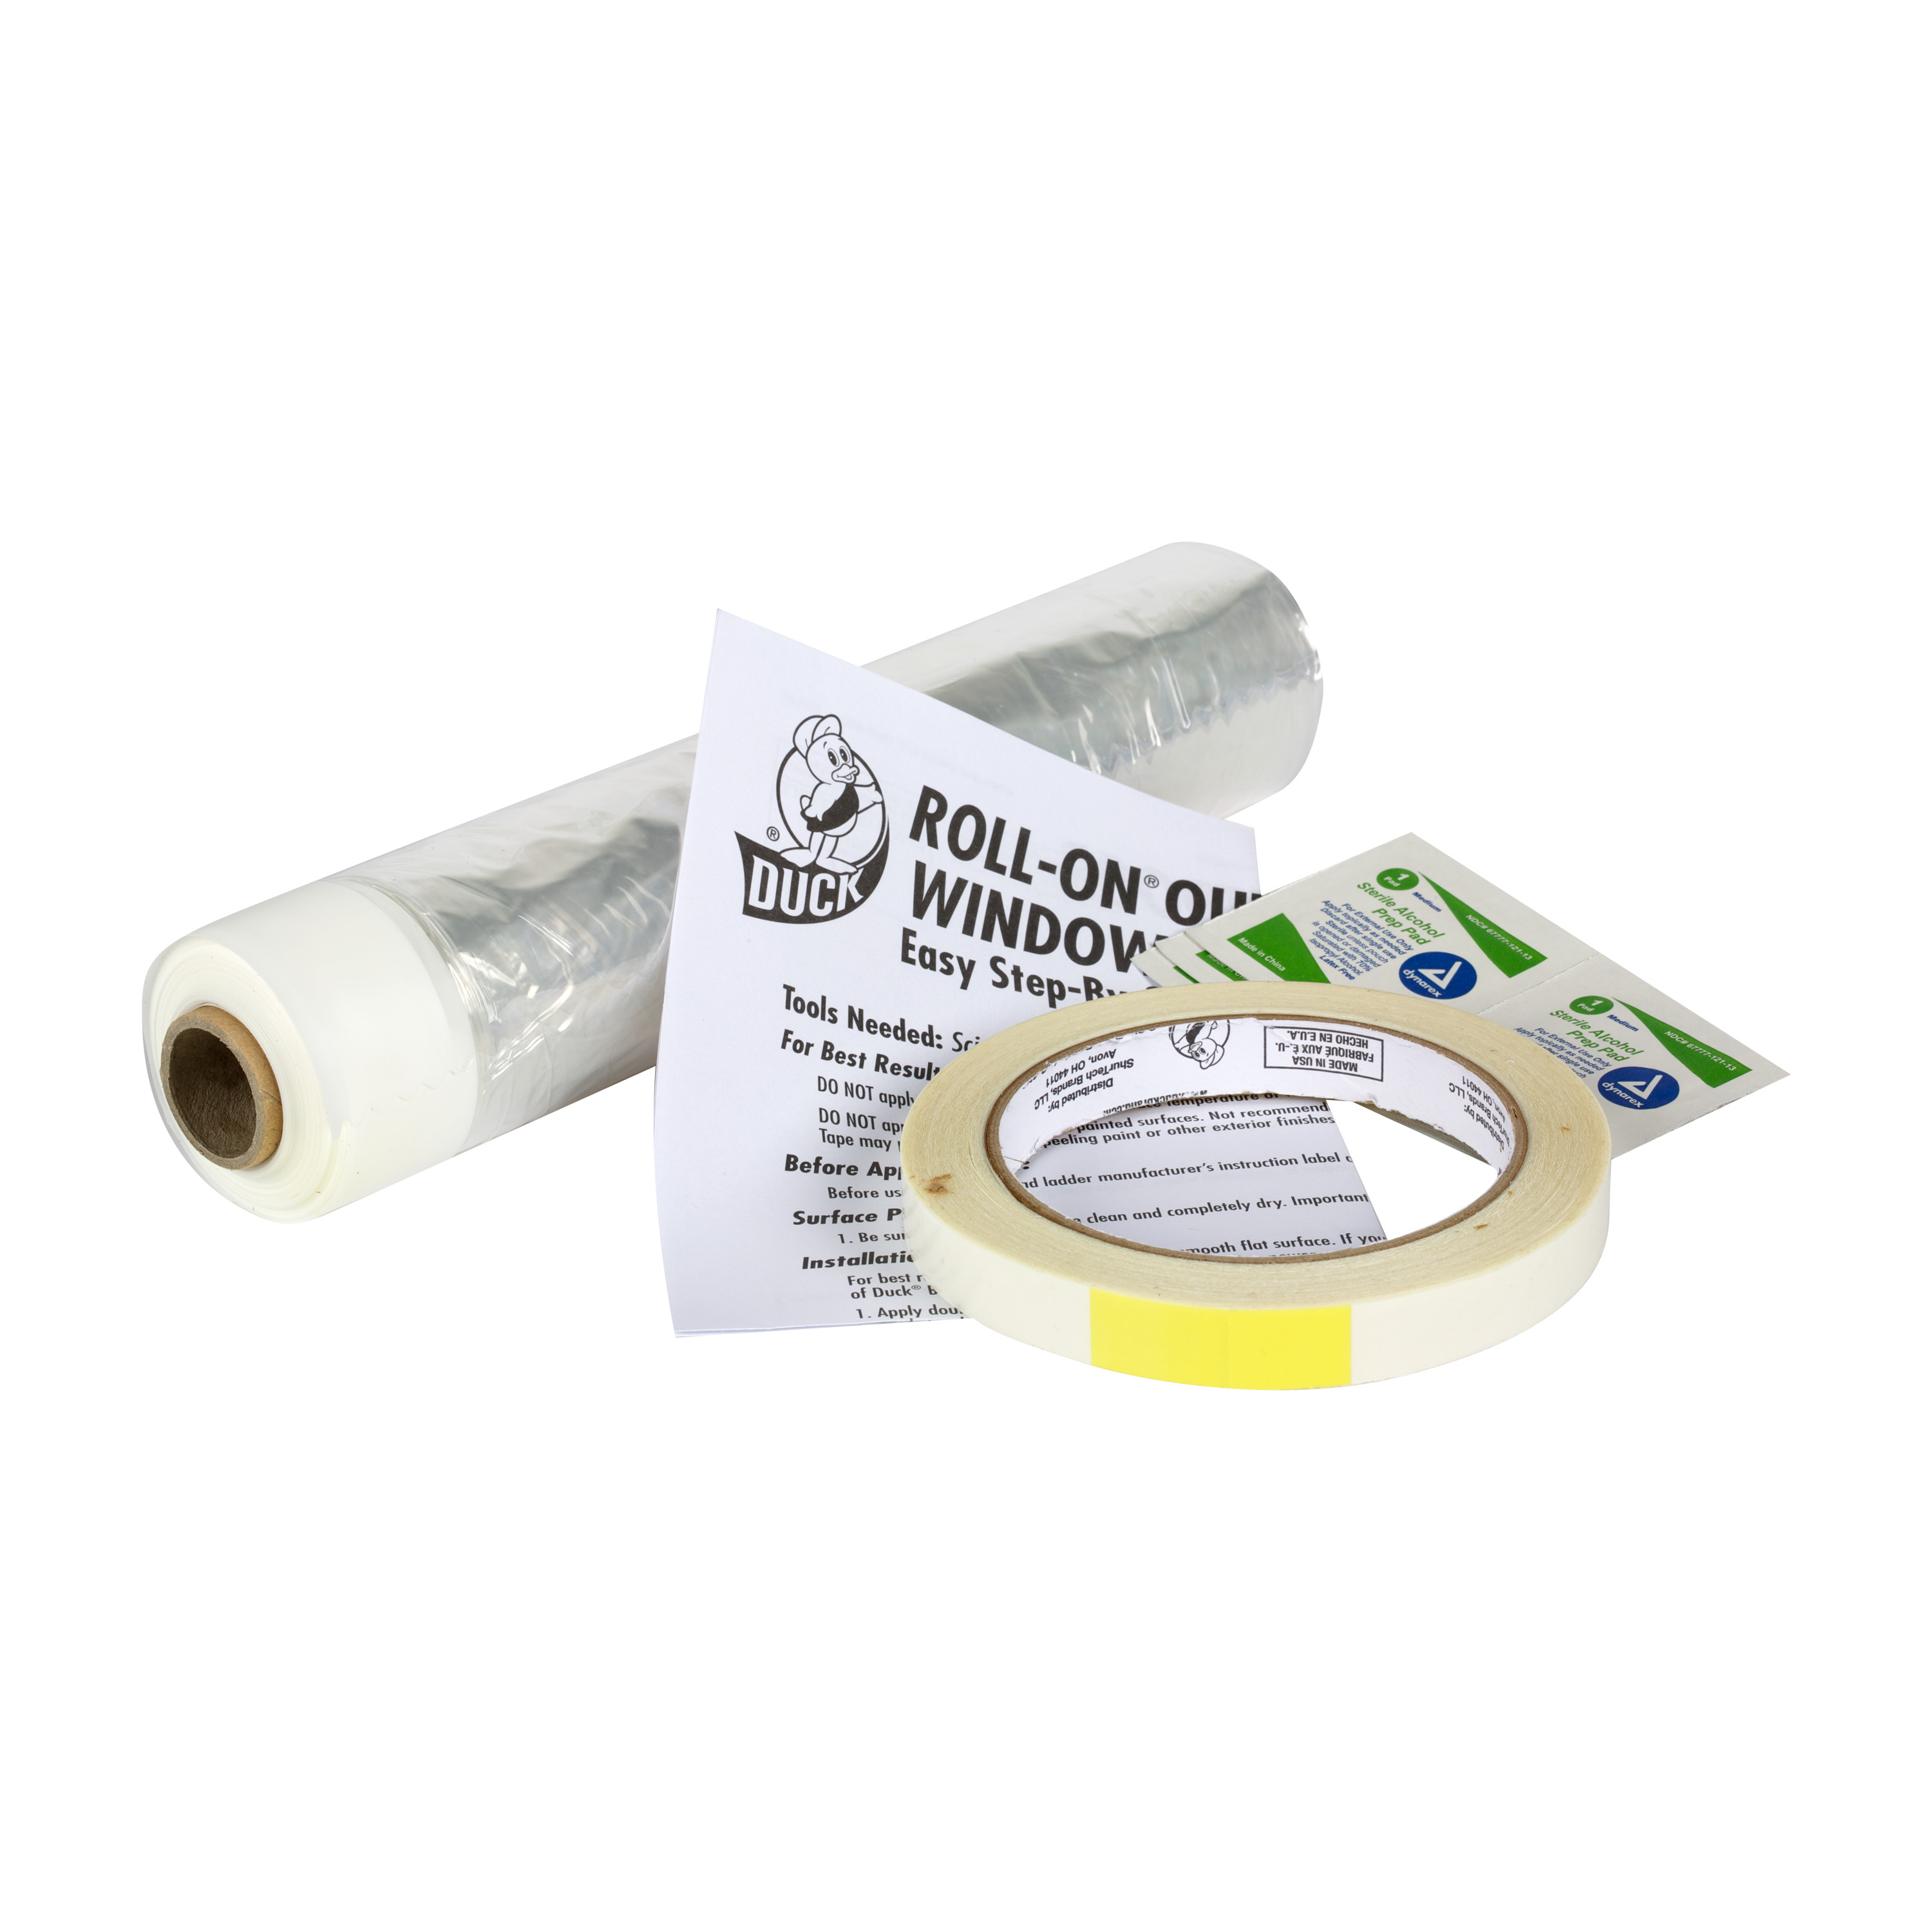 Duck Brand Roll-On Clear Plastic Indoor Window Insulation Film Kit, 62 in. x 120 in., 3 Pack - image 4 of 11